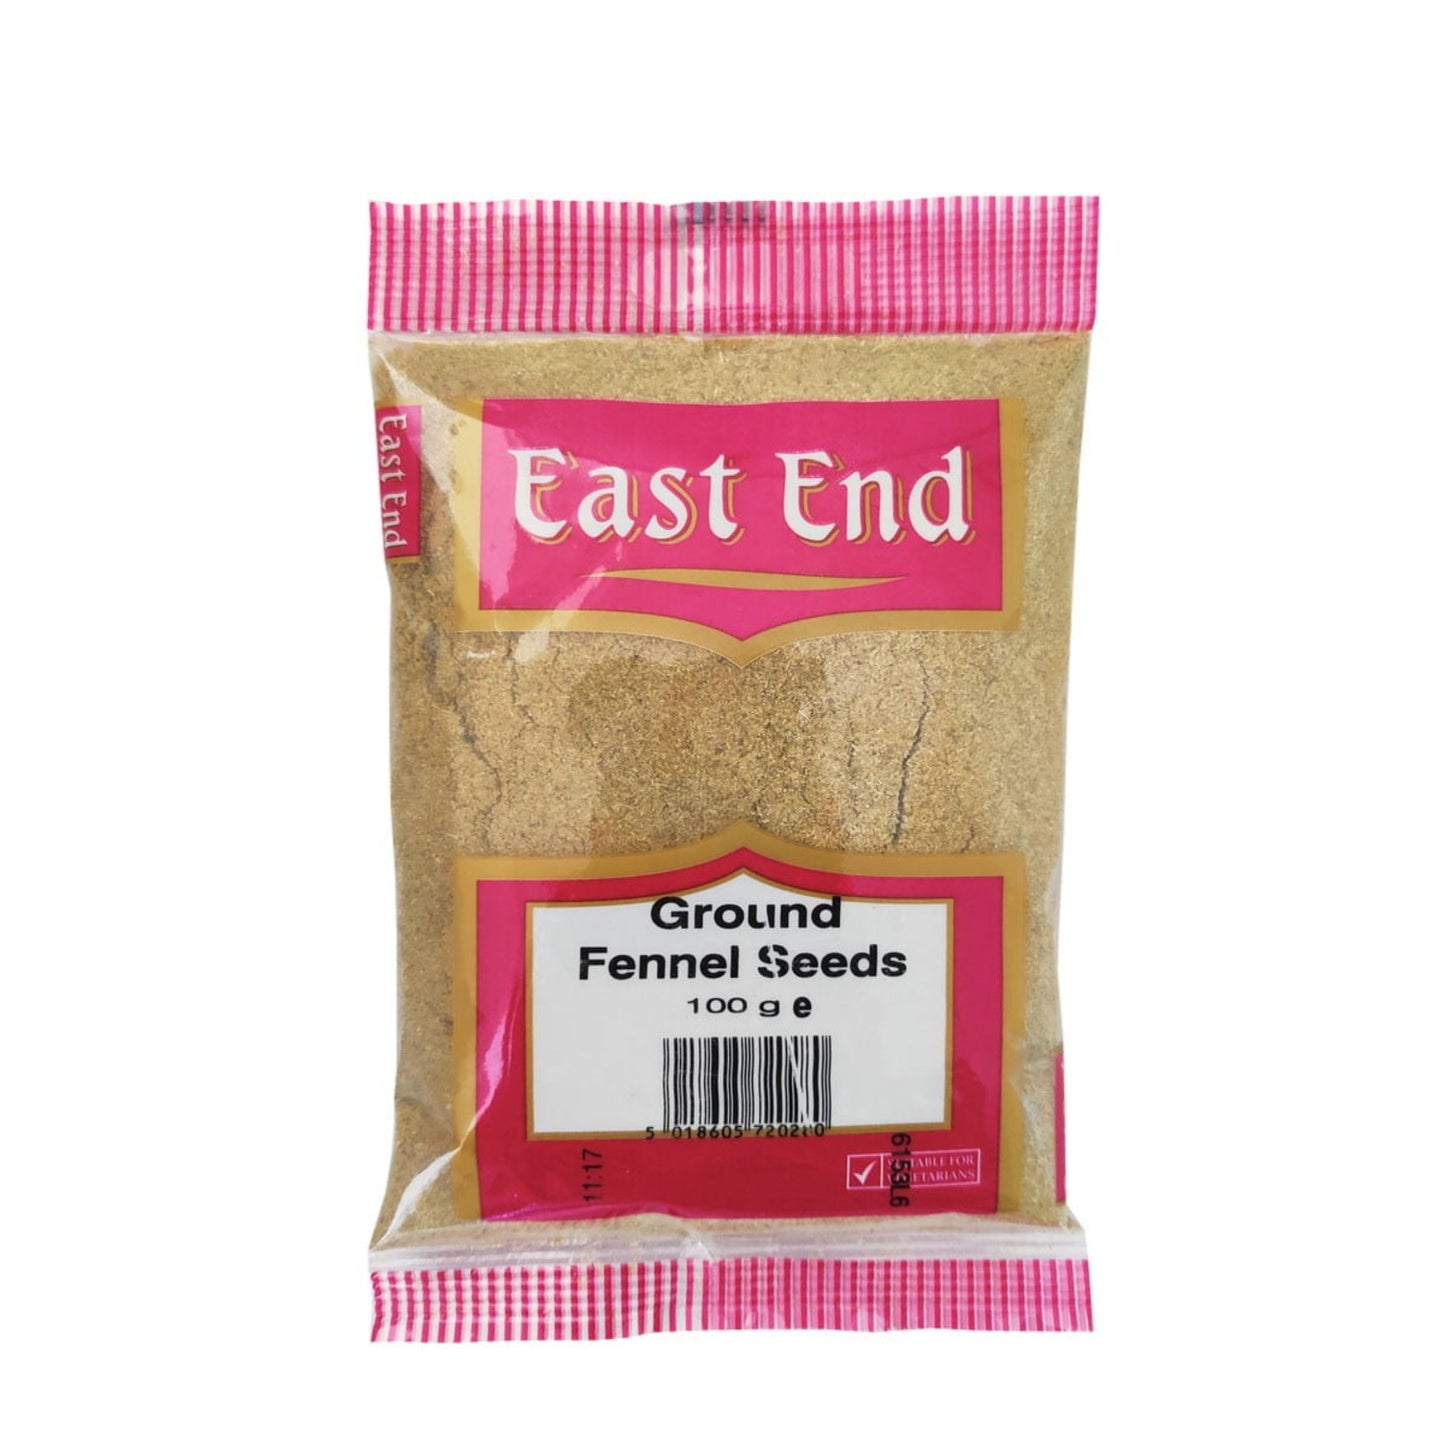 East End Ground Fennel Seeds 100g